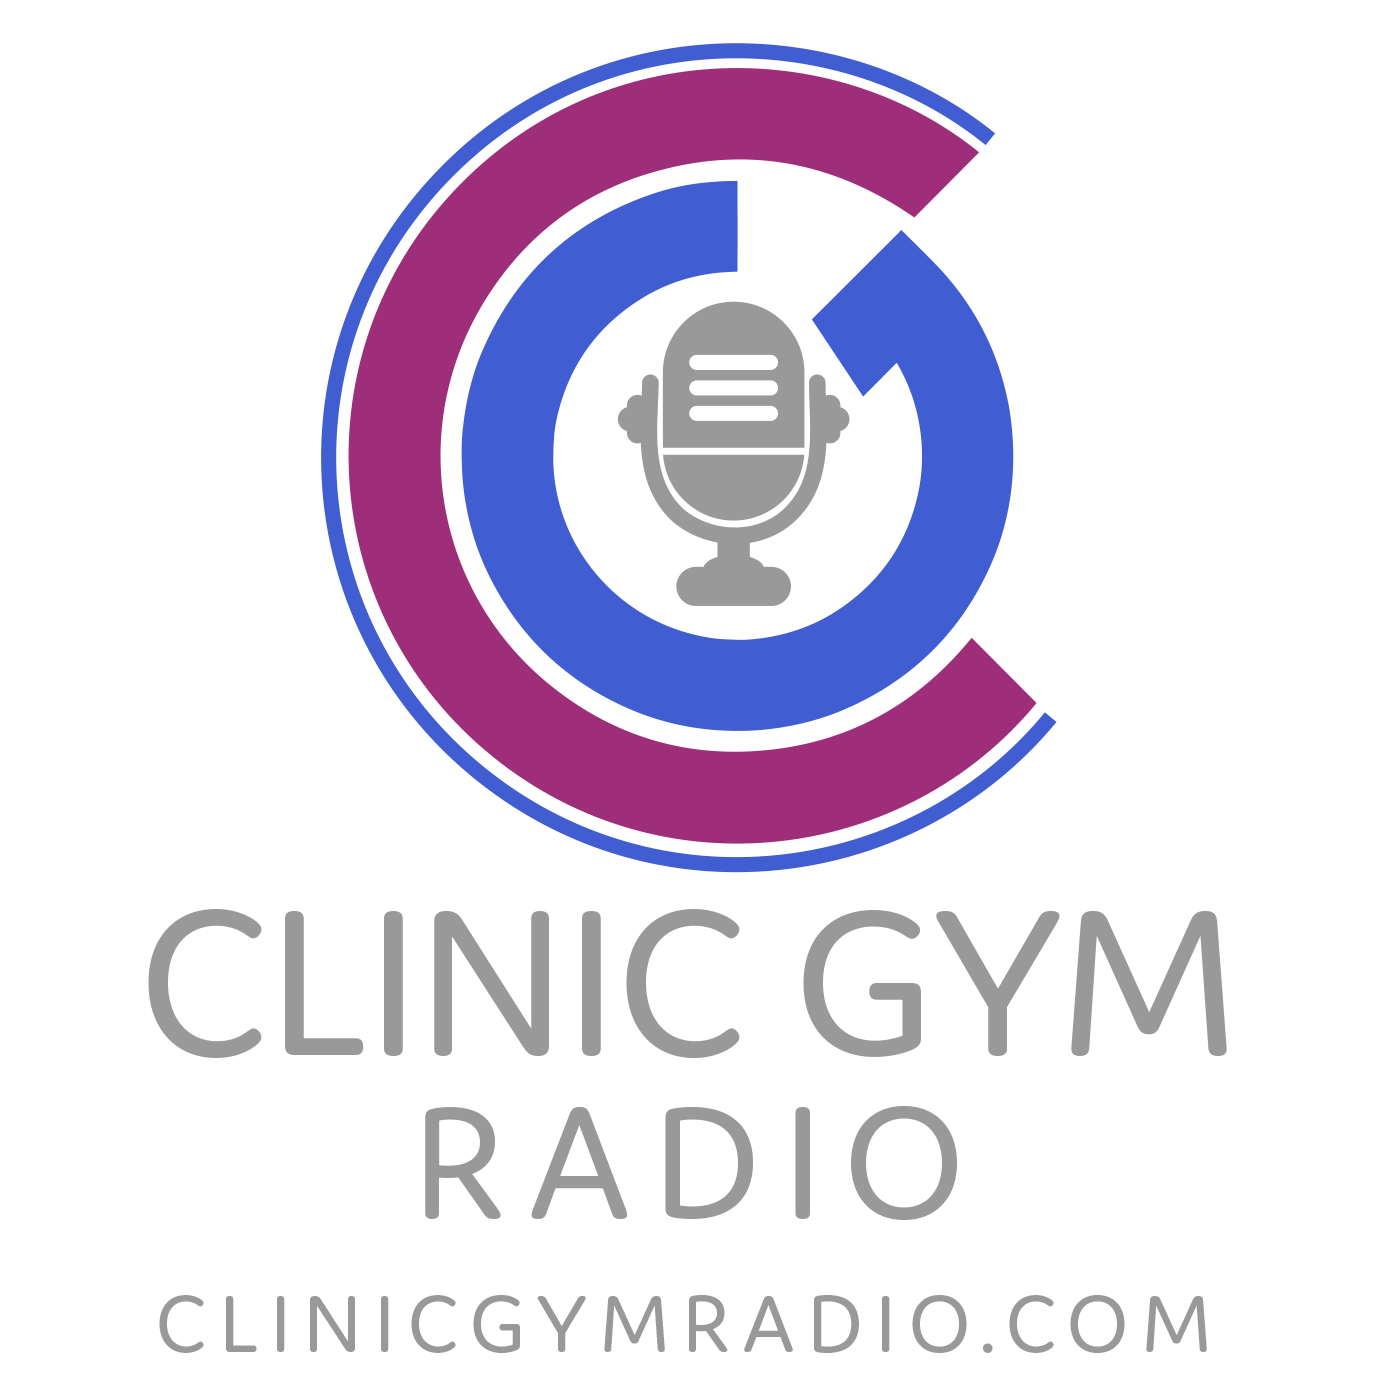 Checking in With Curt Kippenberger and His Successful Clinic Gym